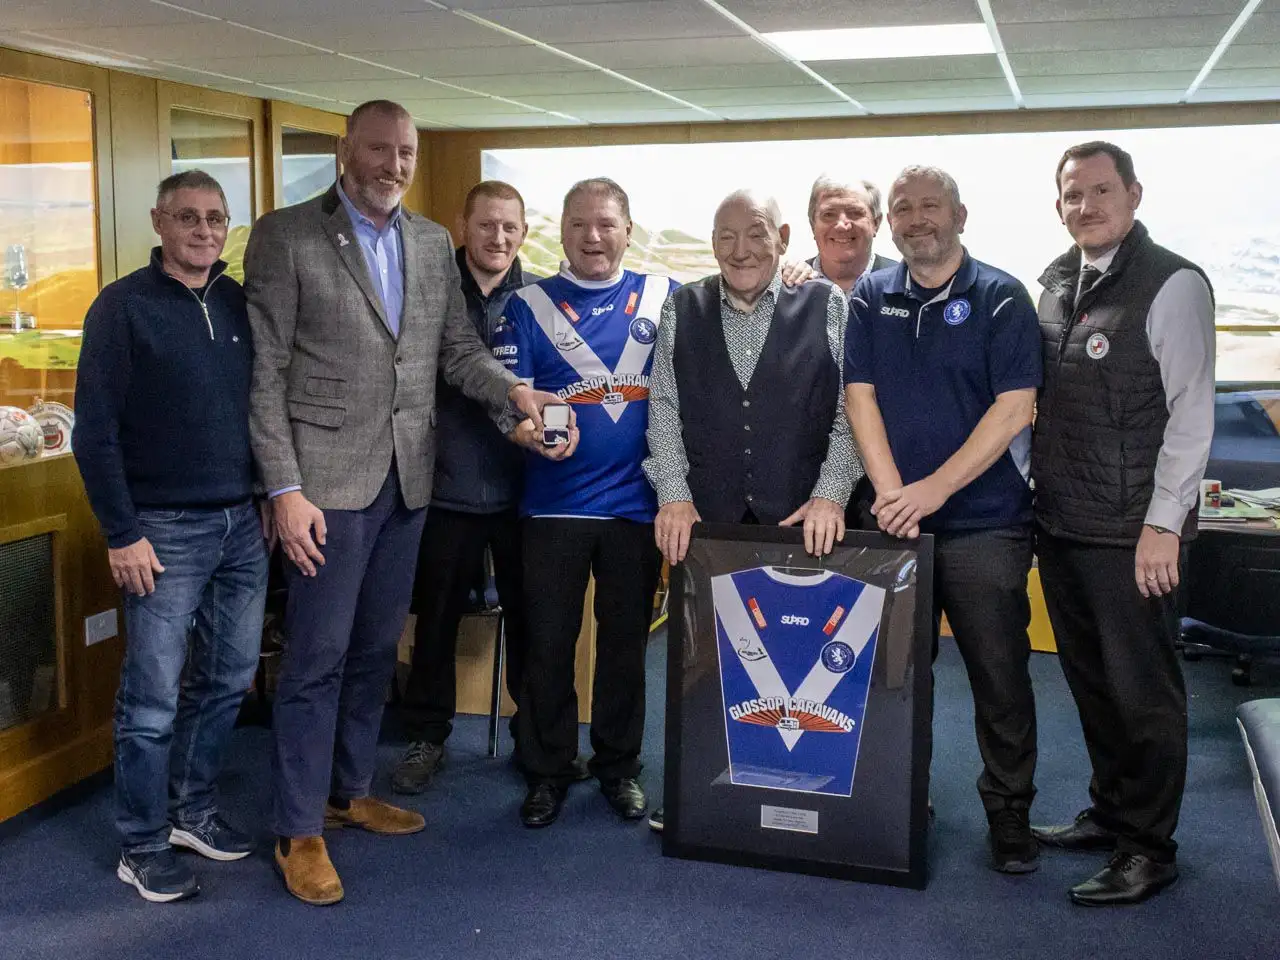 Lions and RFL chief Ralph Rimmer re-unite Stan with long lost medal